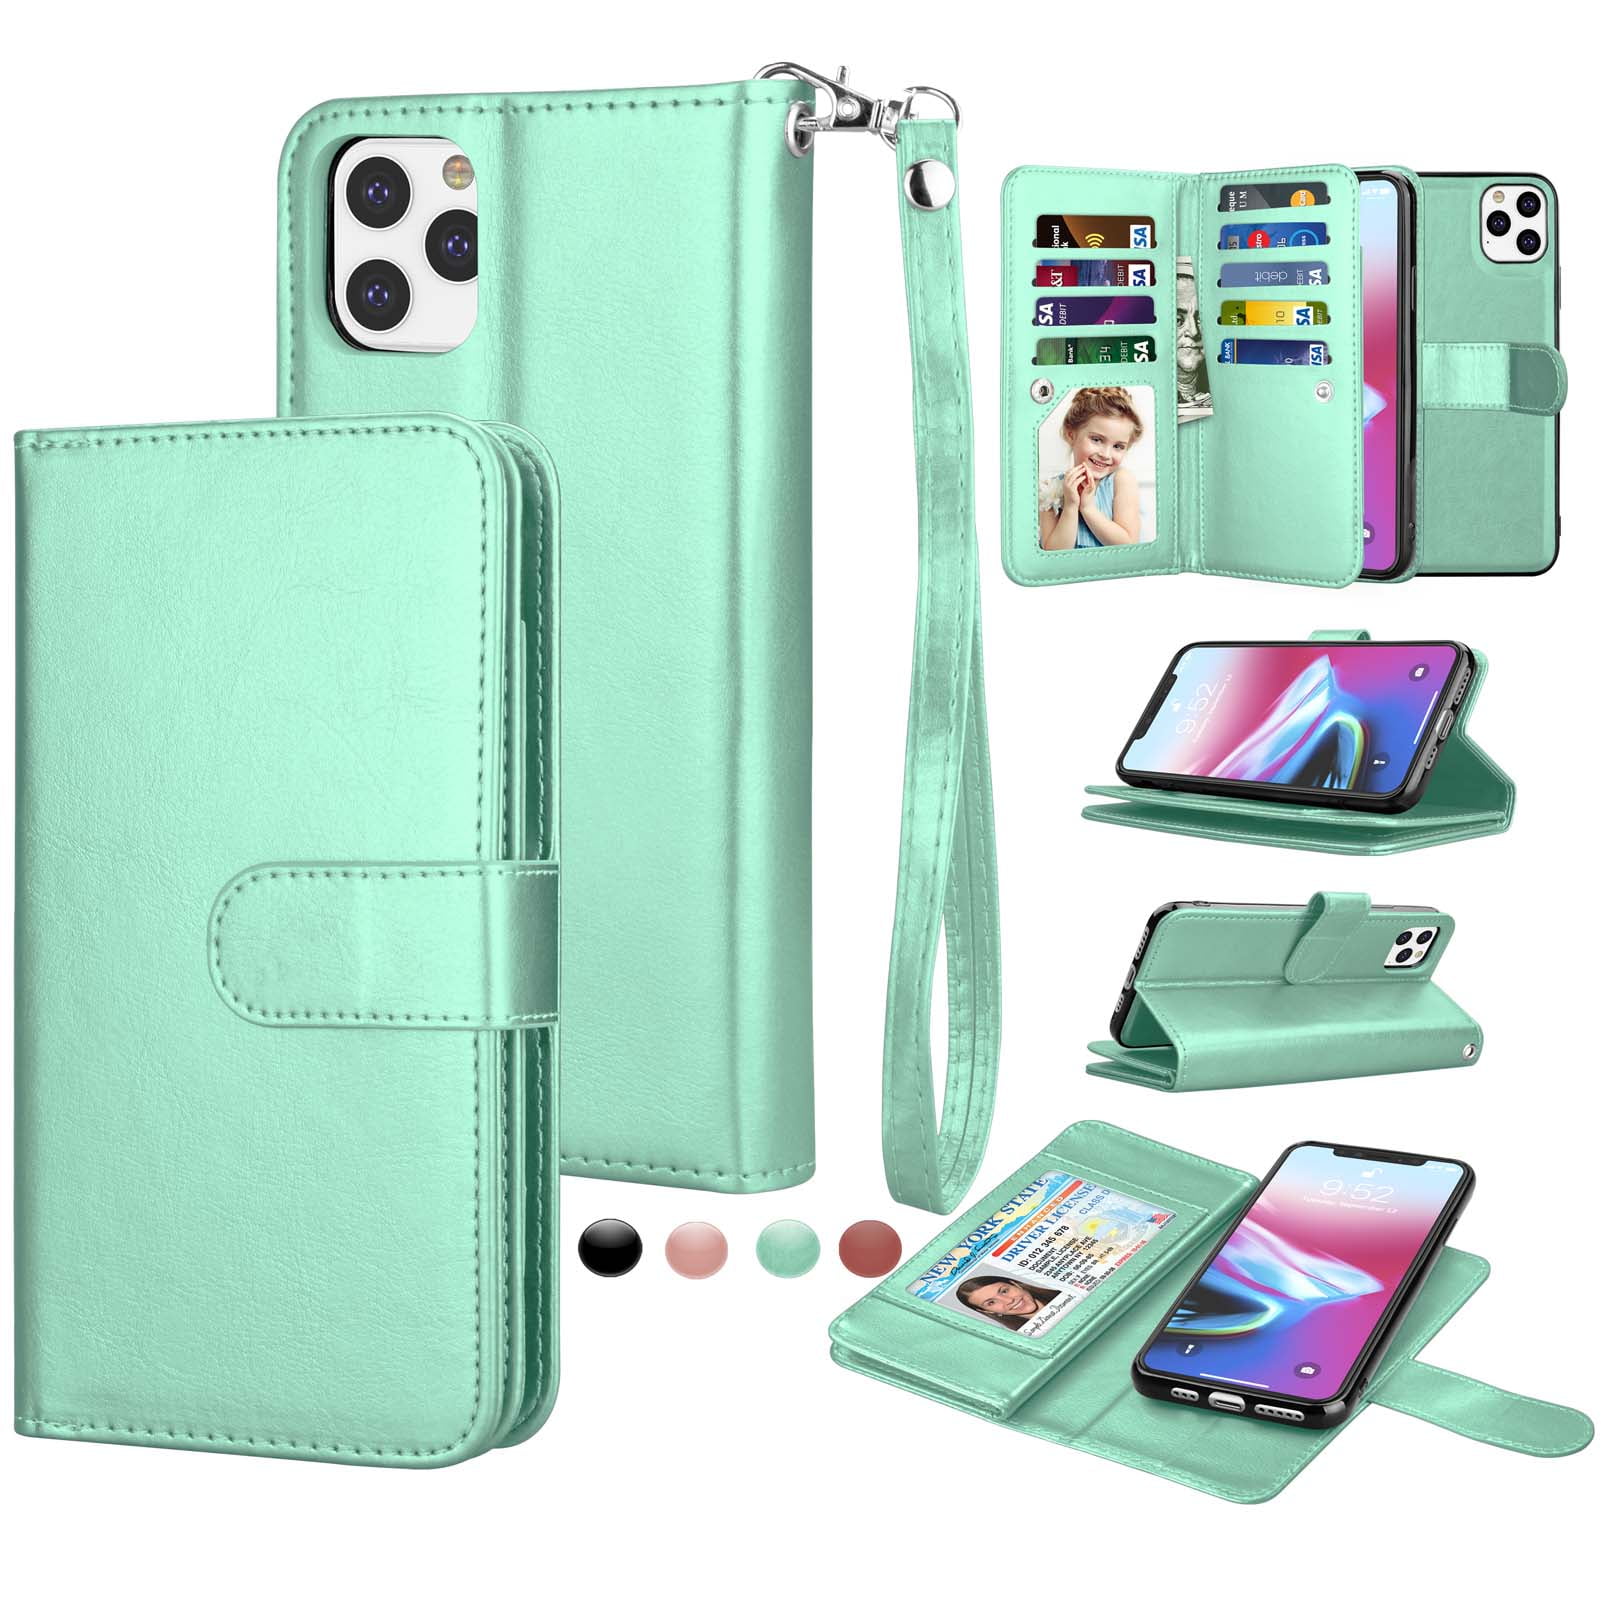 Case for iPhone XR Flip Case Slim PU Leather Wallet Case Rose Embossing Shockproof Folding Stand Cover with Credit Card Holder for iPhone XR,Green Magnetic closure